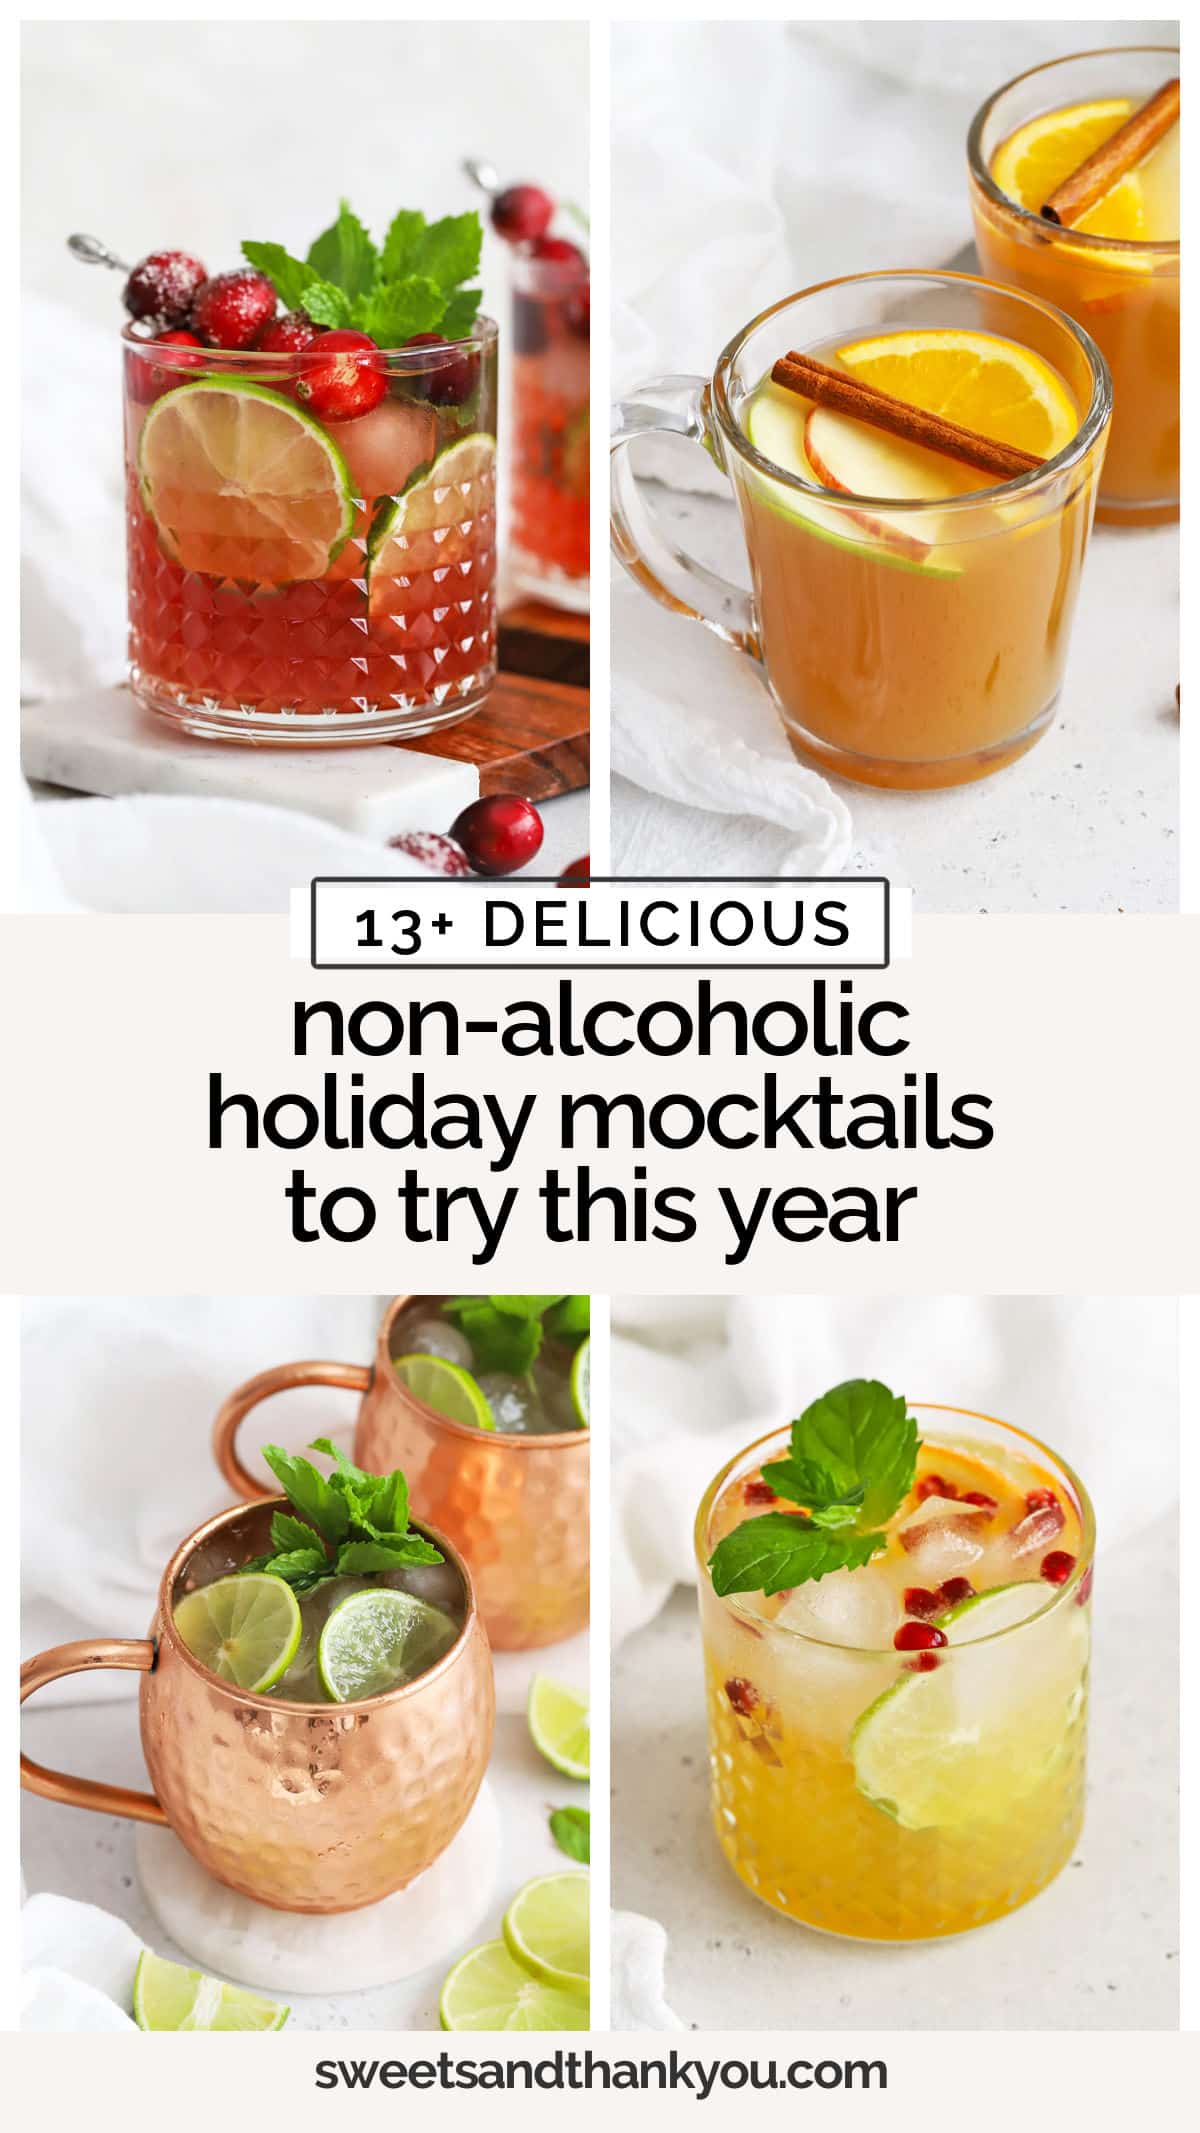 Looking for non-alcoholic Christmas drinks to serve this season? These holiday & Christmas mocktail recipes are perfect for kids & grown-ups! Choose from refreshing holiday mocktails like Non-alcoholic moscow mules and Cranberry Lime spriters to kid-friendly Christmas drinks like Shirley Temples & Mint Limeade. There's a festive Christmas drink for everyone! 